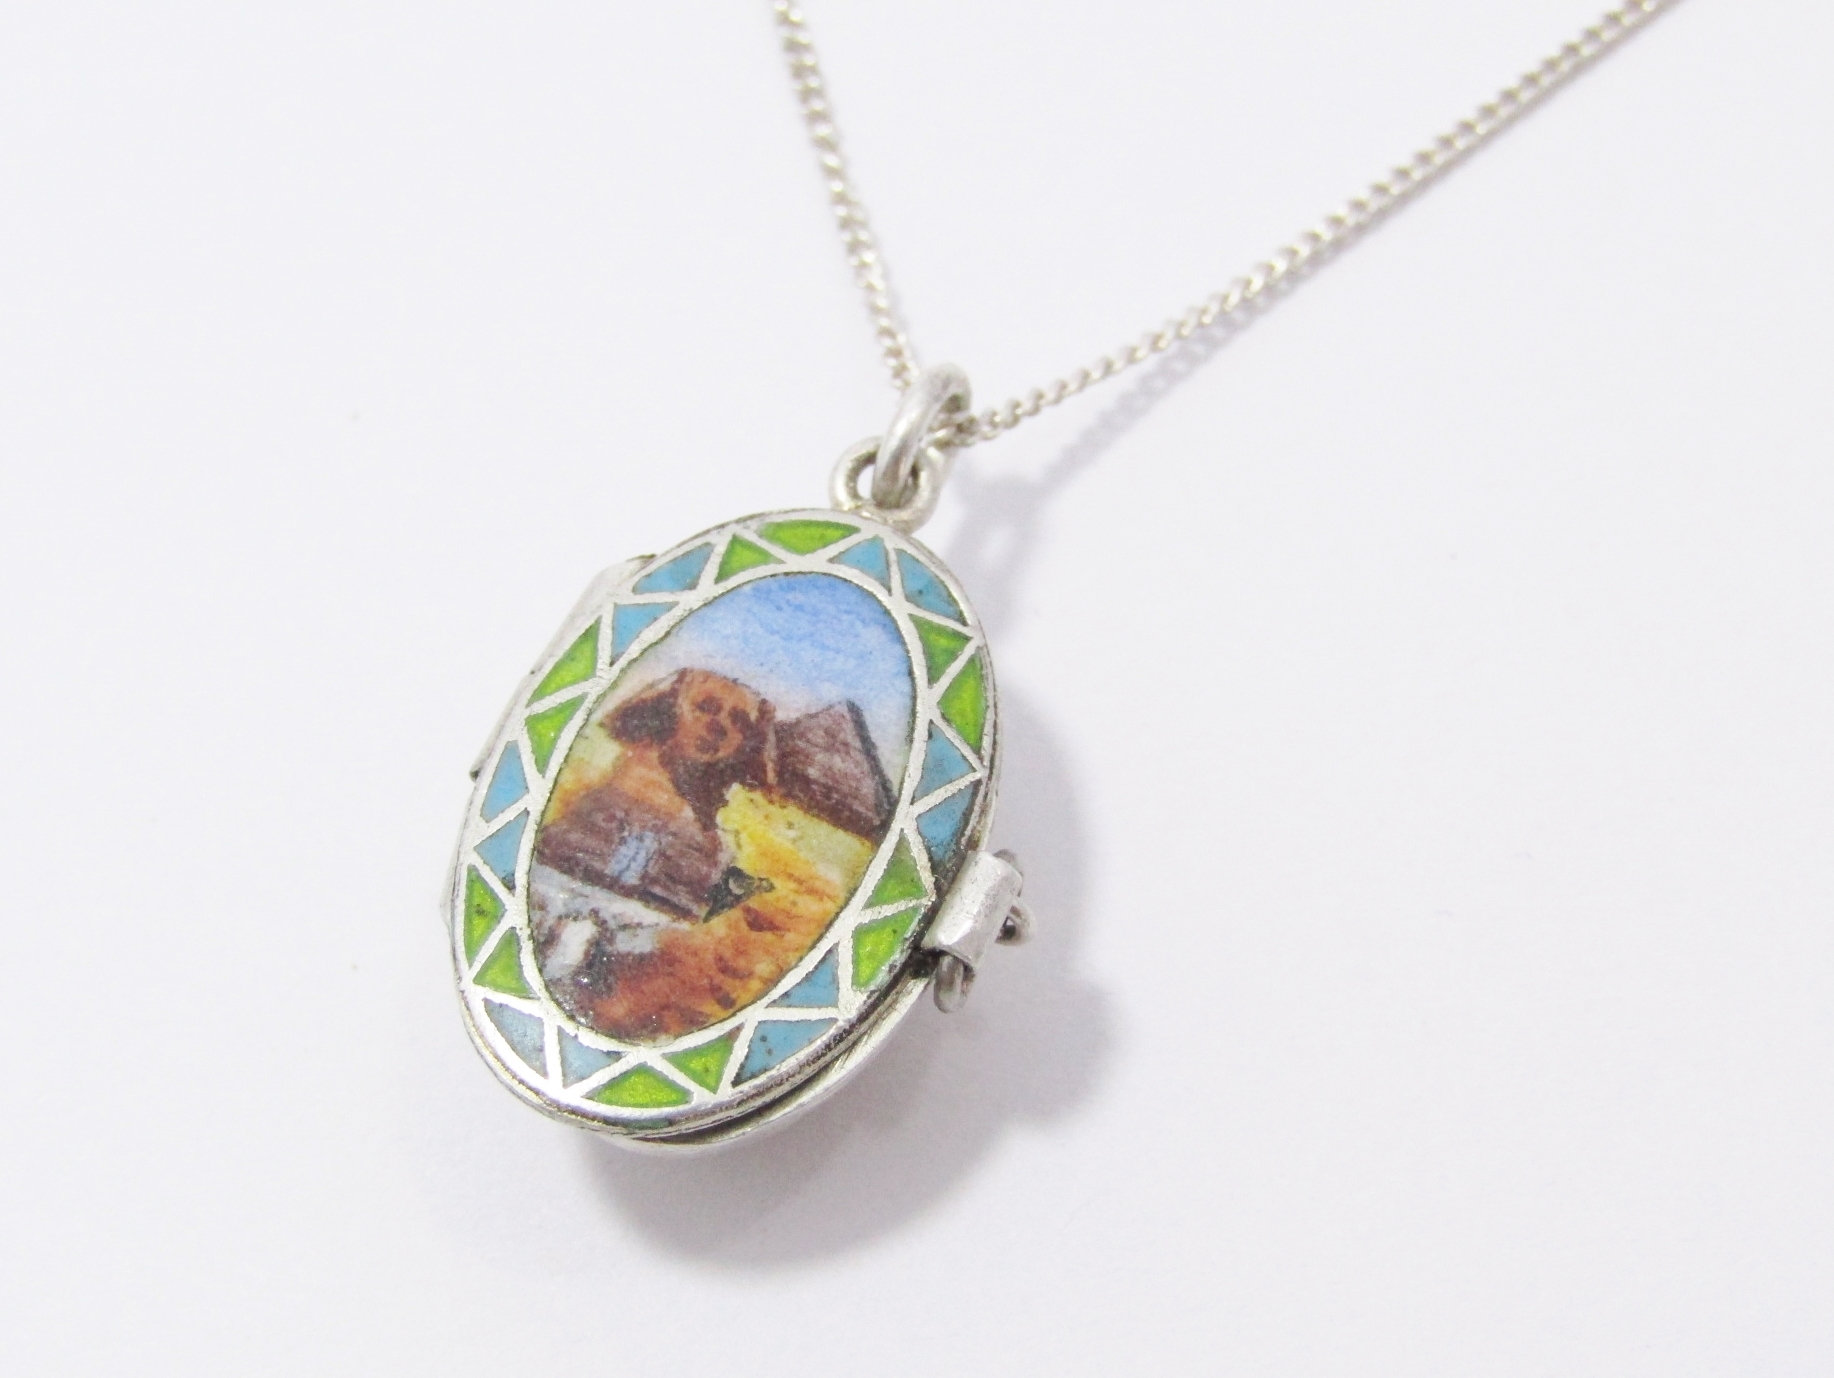 A Beautiful Egyptian Themed Woven Basket Locket Pendant With Enameling on chain in sterling silver